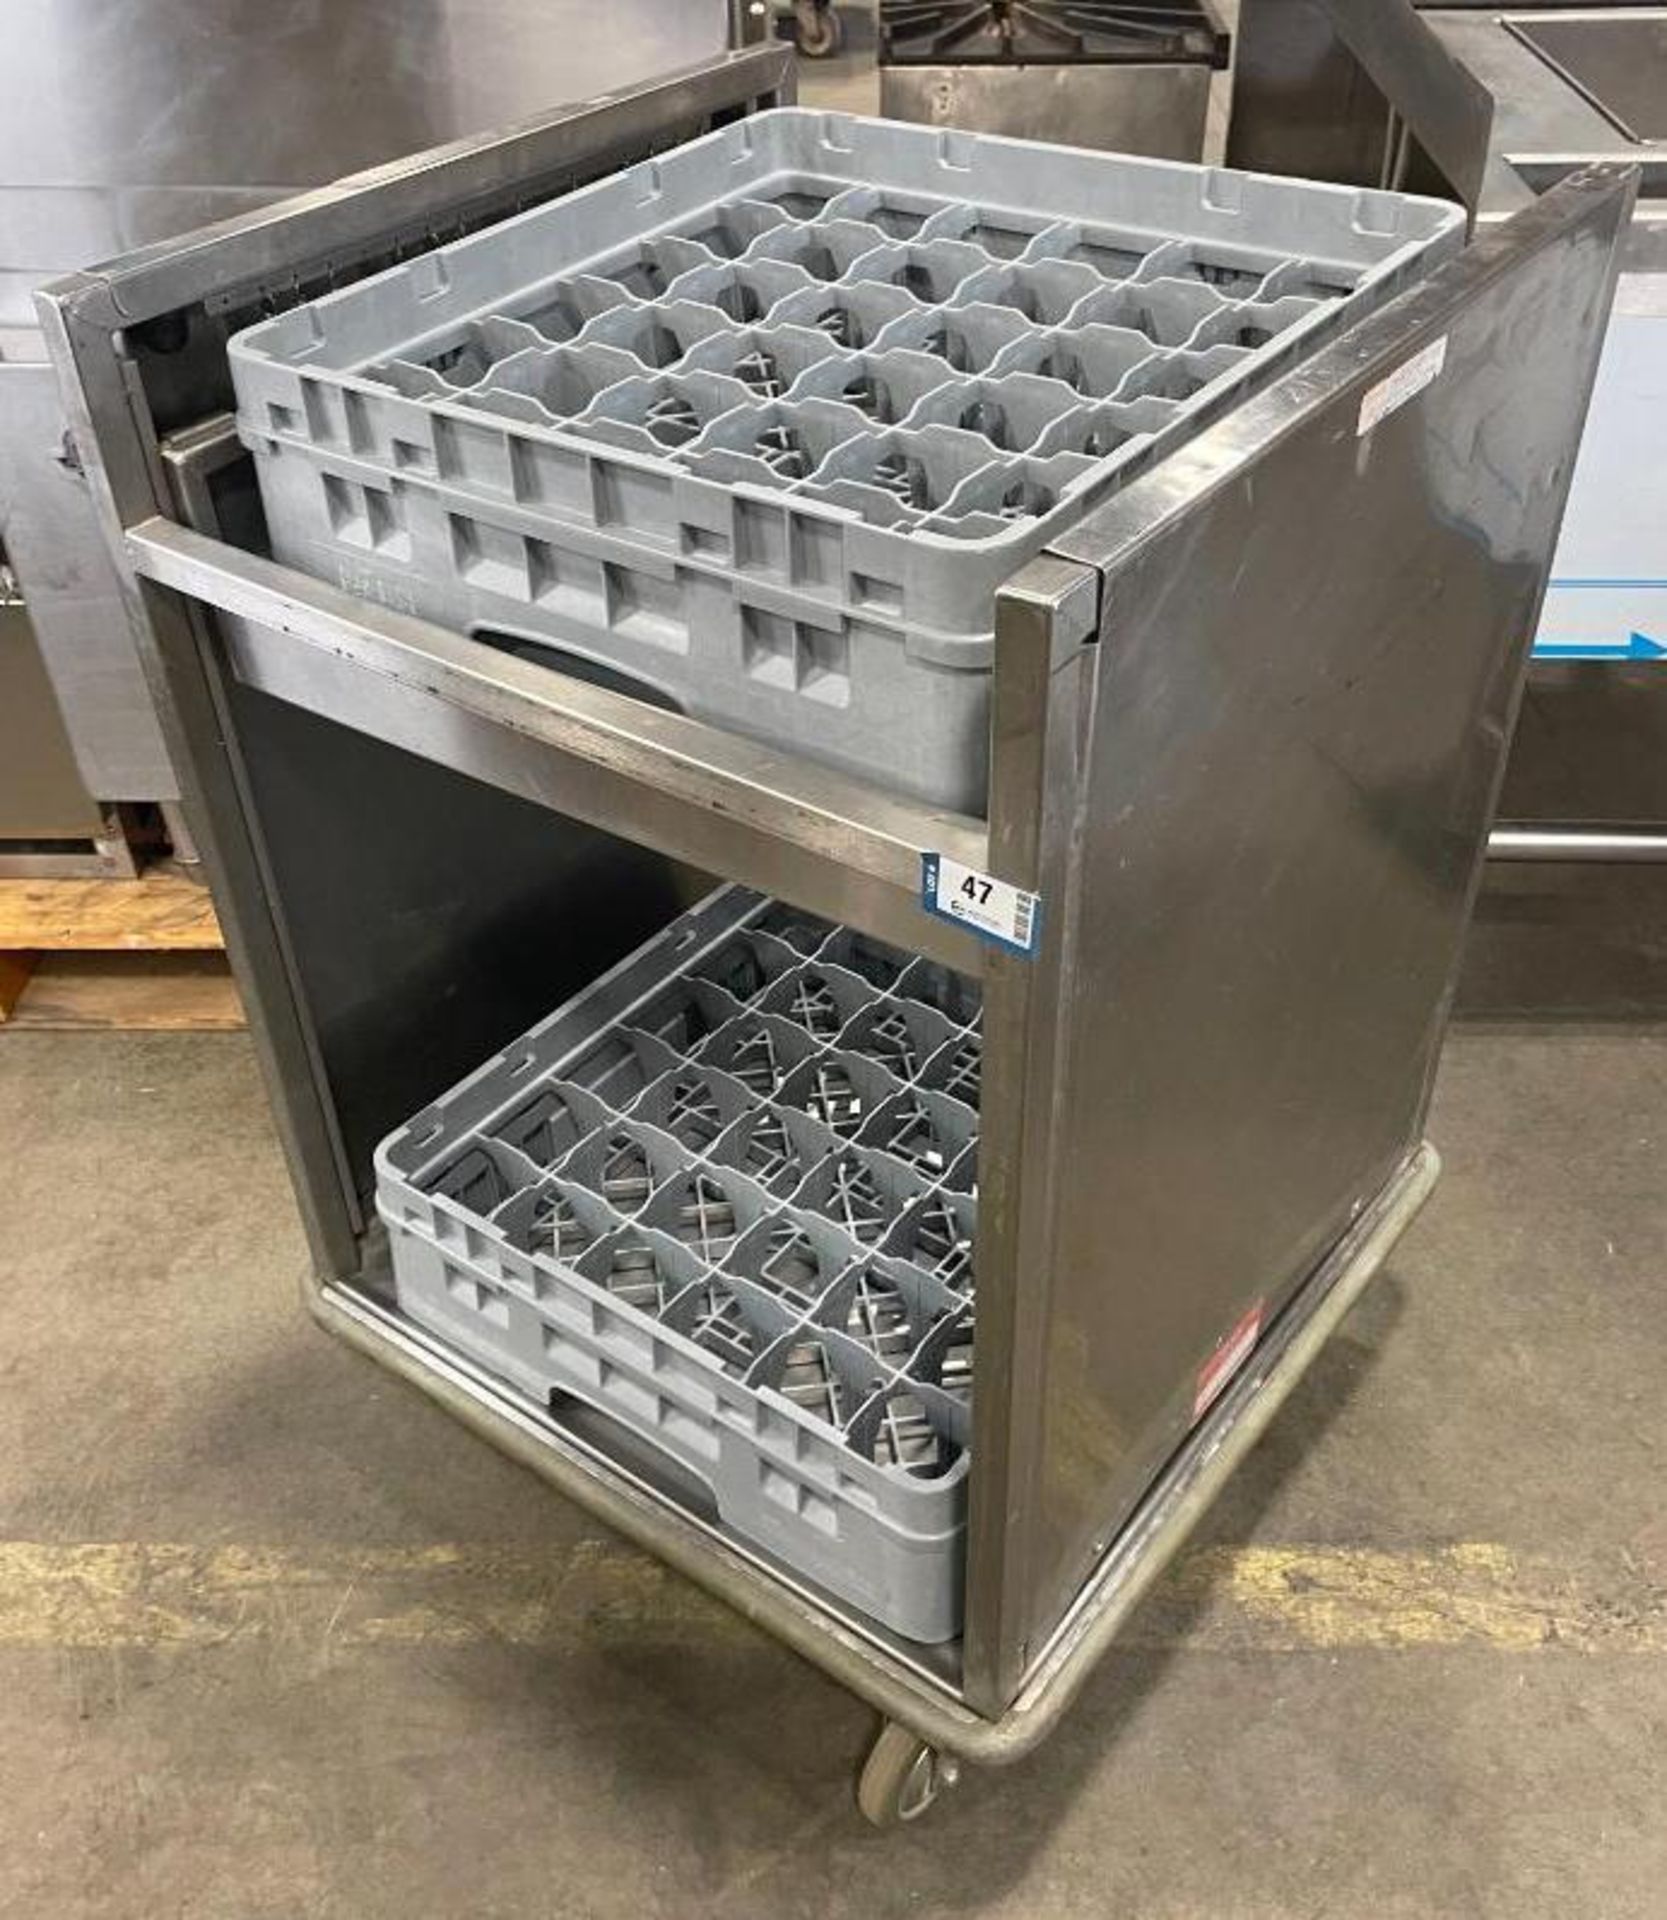 HATCH TRD-M-2020 MOBILE TRAY AND RACK DISPENSER, STAINLESS STEEL WITH 2 DISHWASHER RACKS